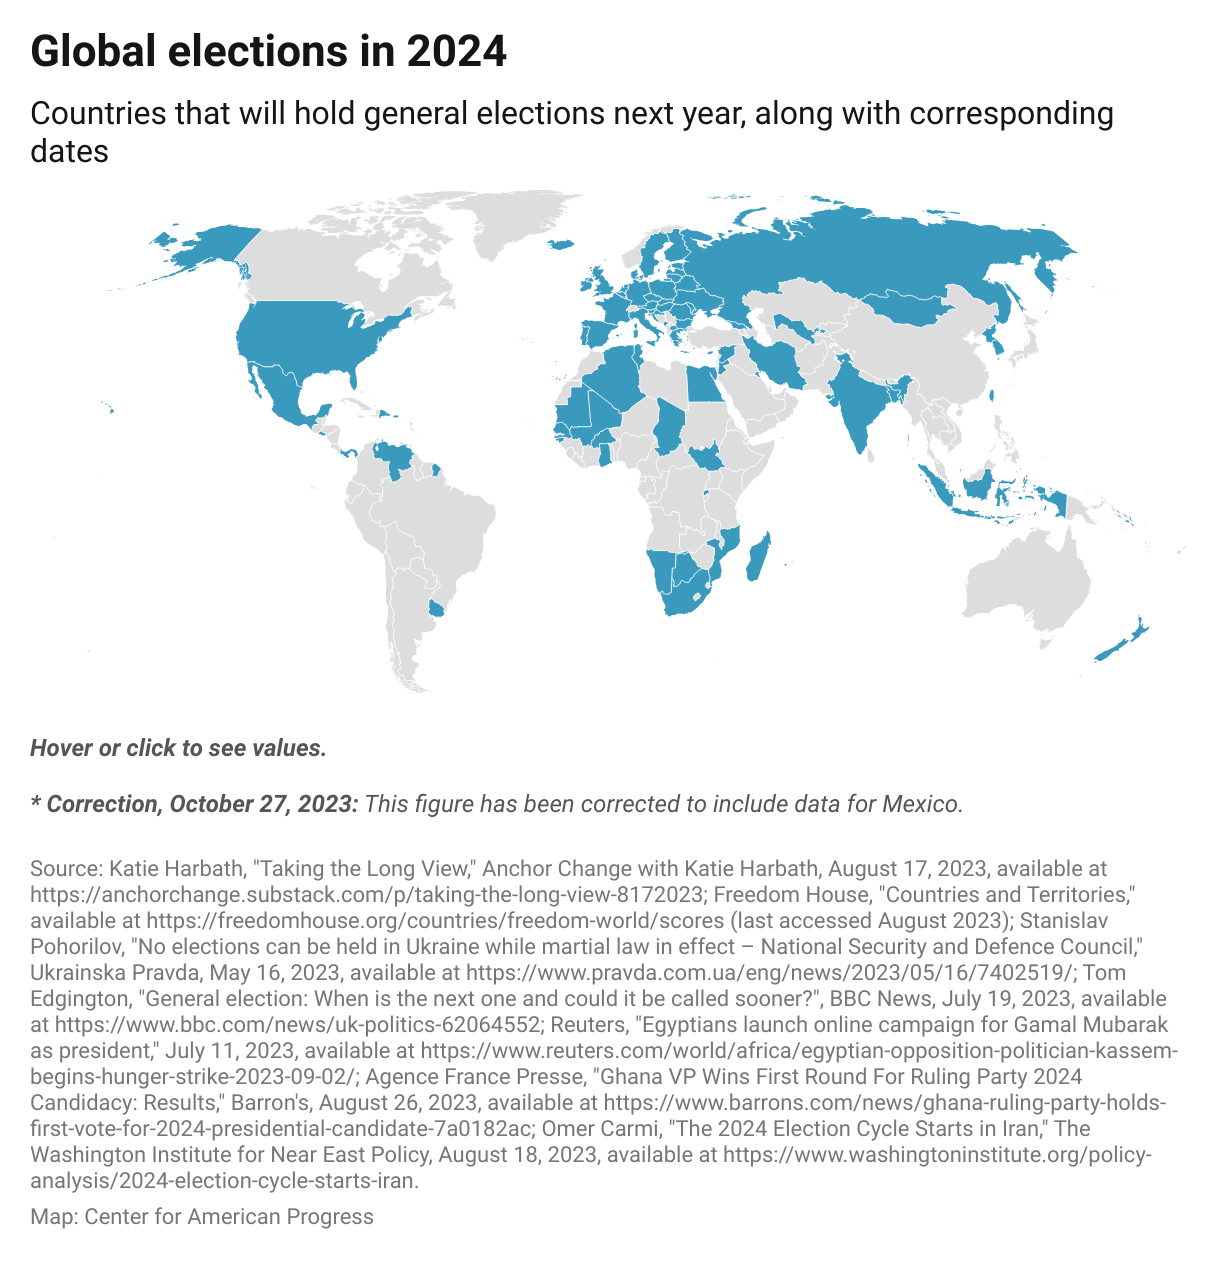 Map that highlights 56 countries and geopolitical unions that will hold an election in 2024.